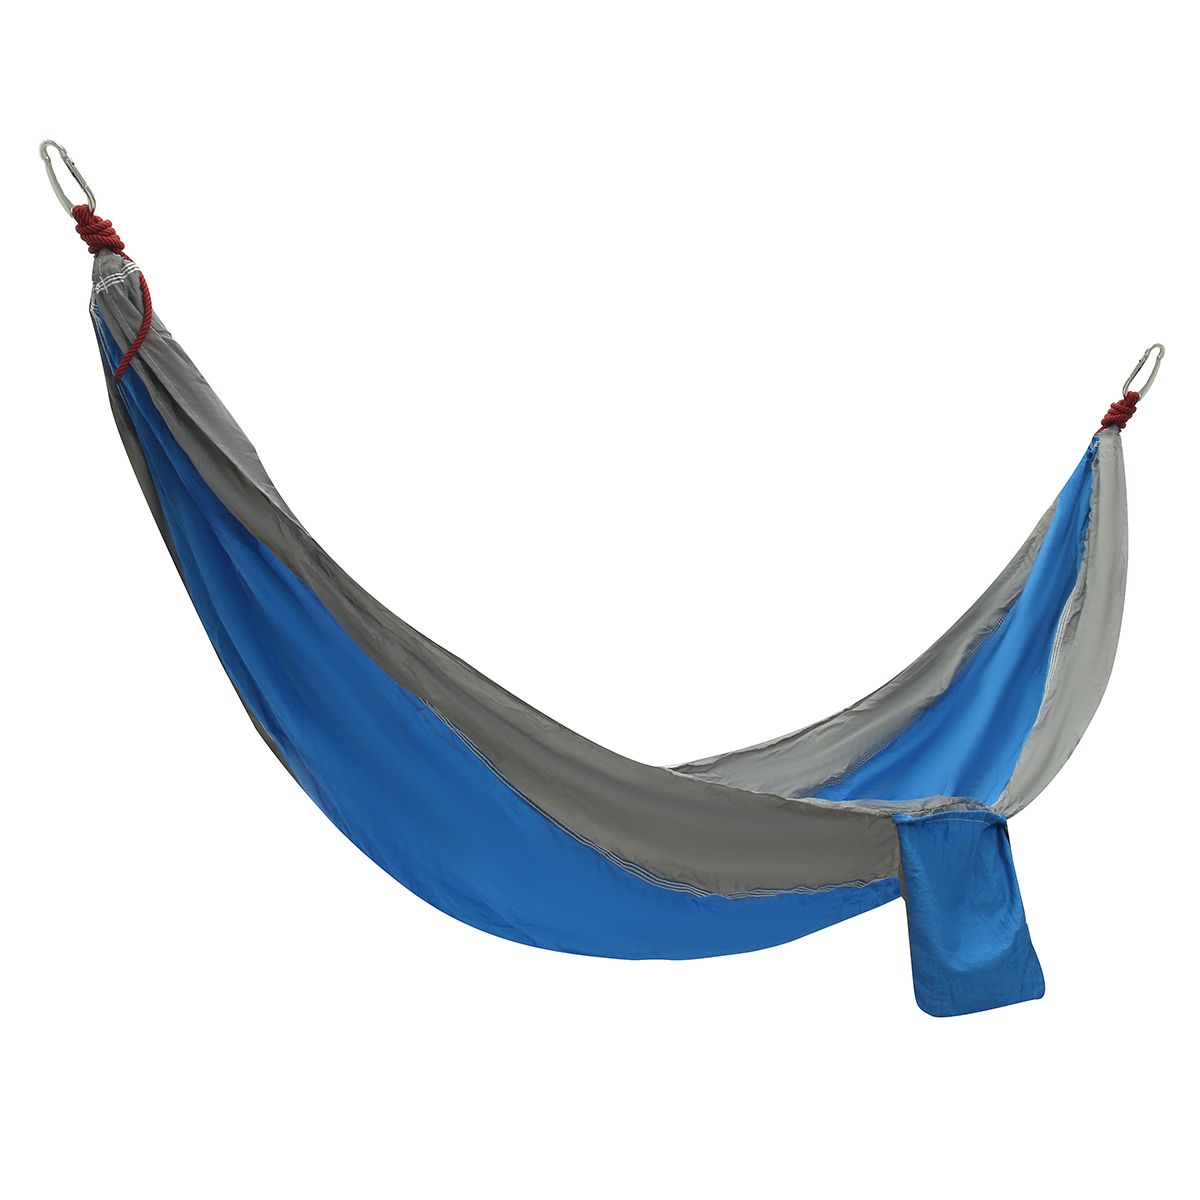 Single-People-Hanging-Swing-Bed-Camping-Hammock-Outdoor-Garden-Travel-with-Storage-Bag-Carabiner-Max-1732038-4